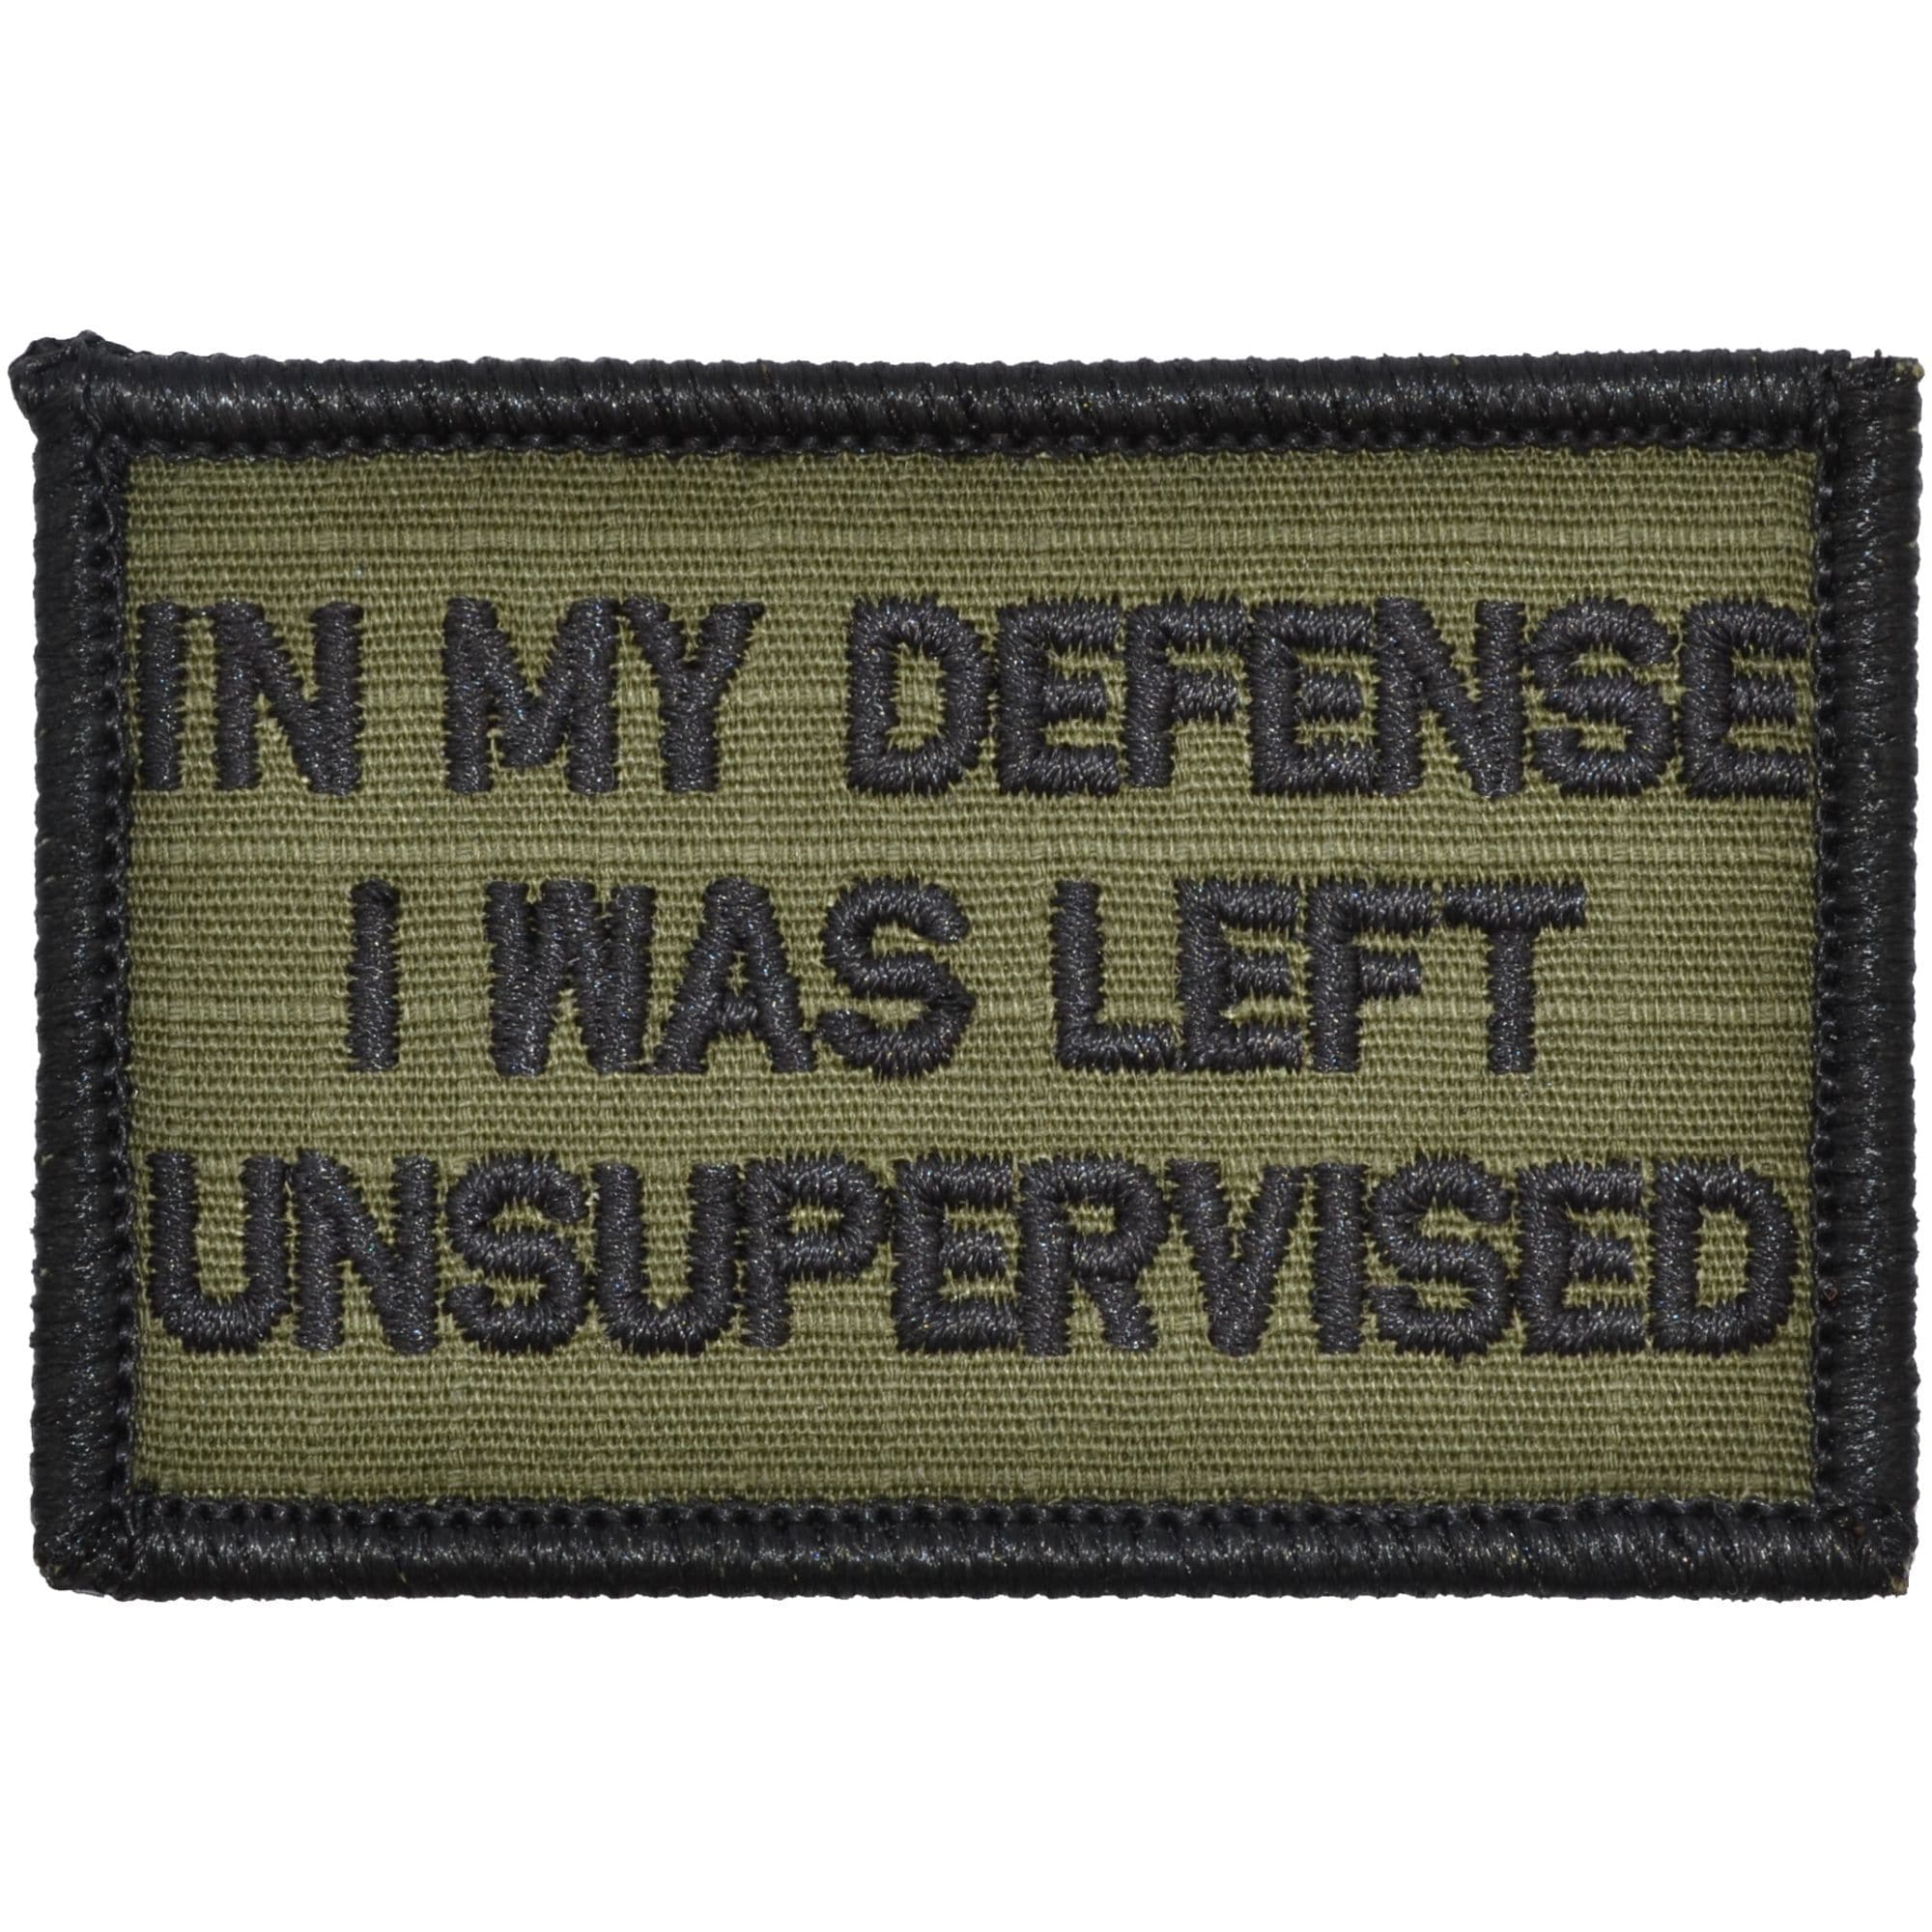 Tactical Gear Junkie Patches Olive Drab In My Defense I Was Left Unsupervised - 2x3 Patch